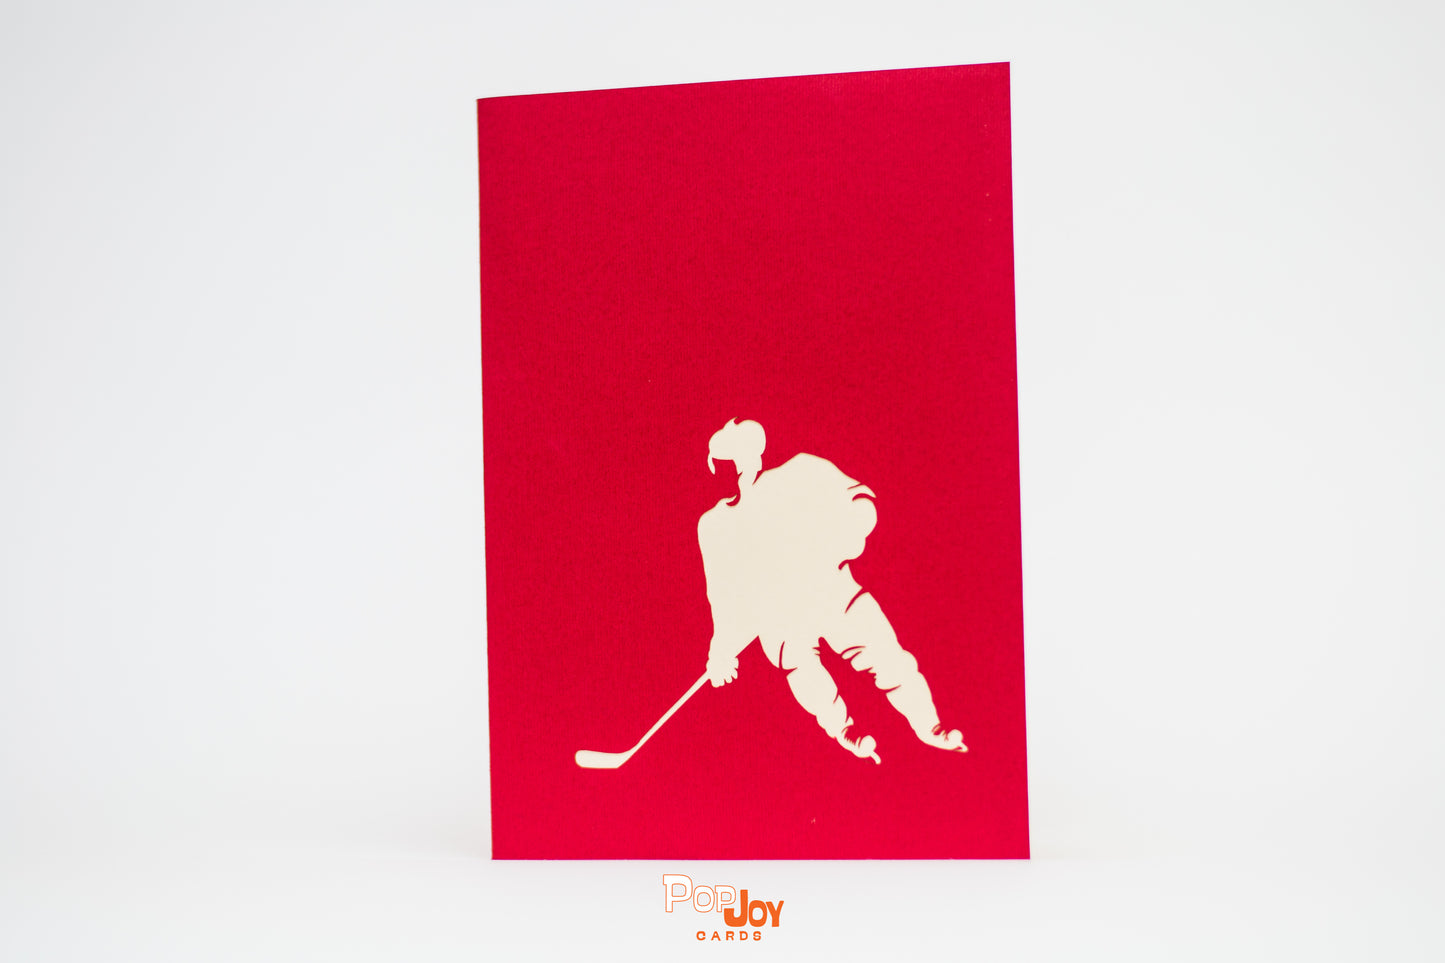 Red card showing silhouette of hockey player with stick in white